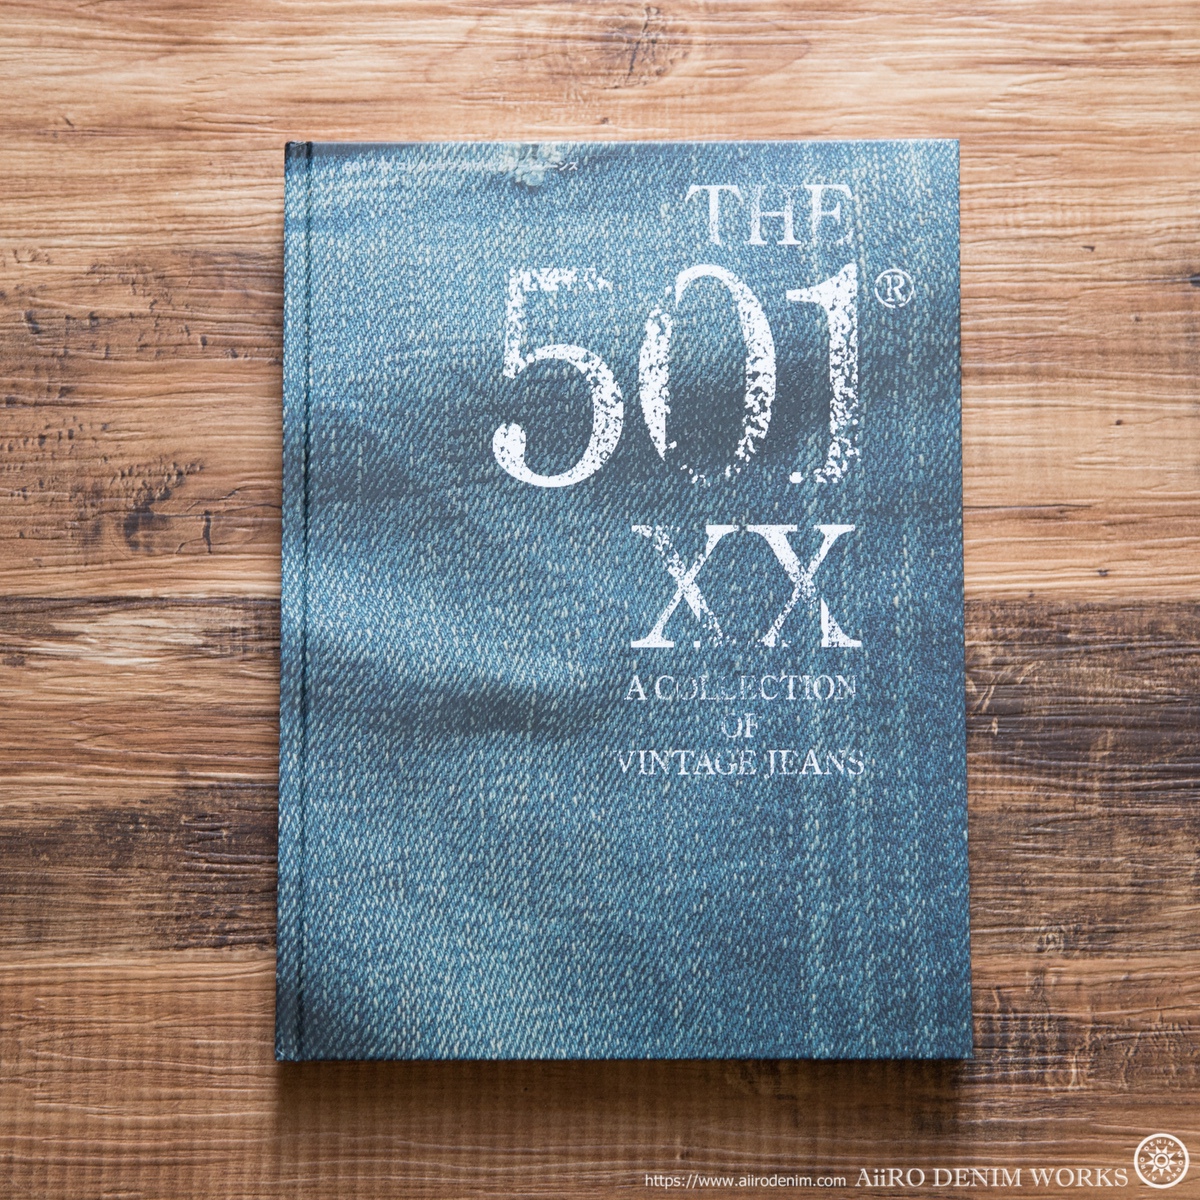 THE 501XX A COLLECTION OF VINTAGE JEANS